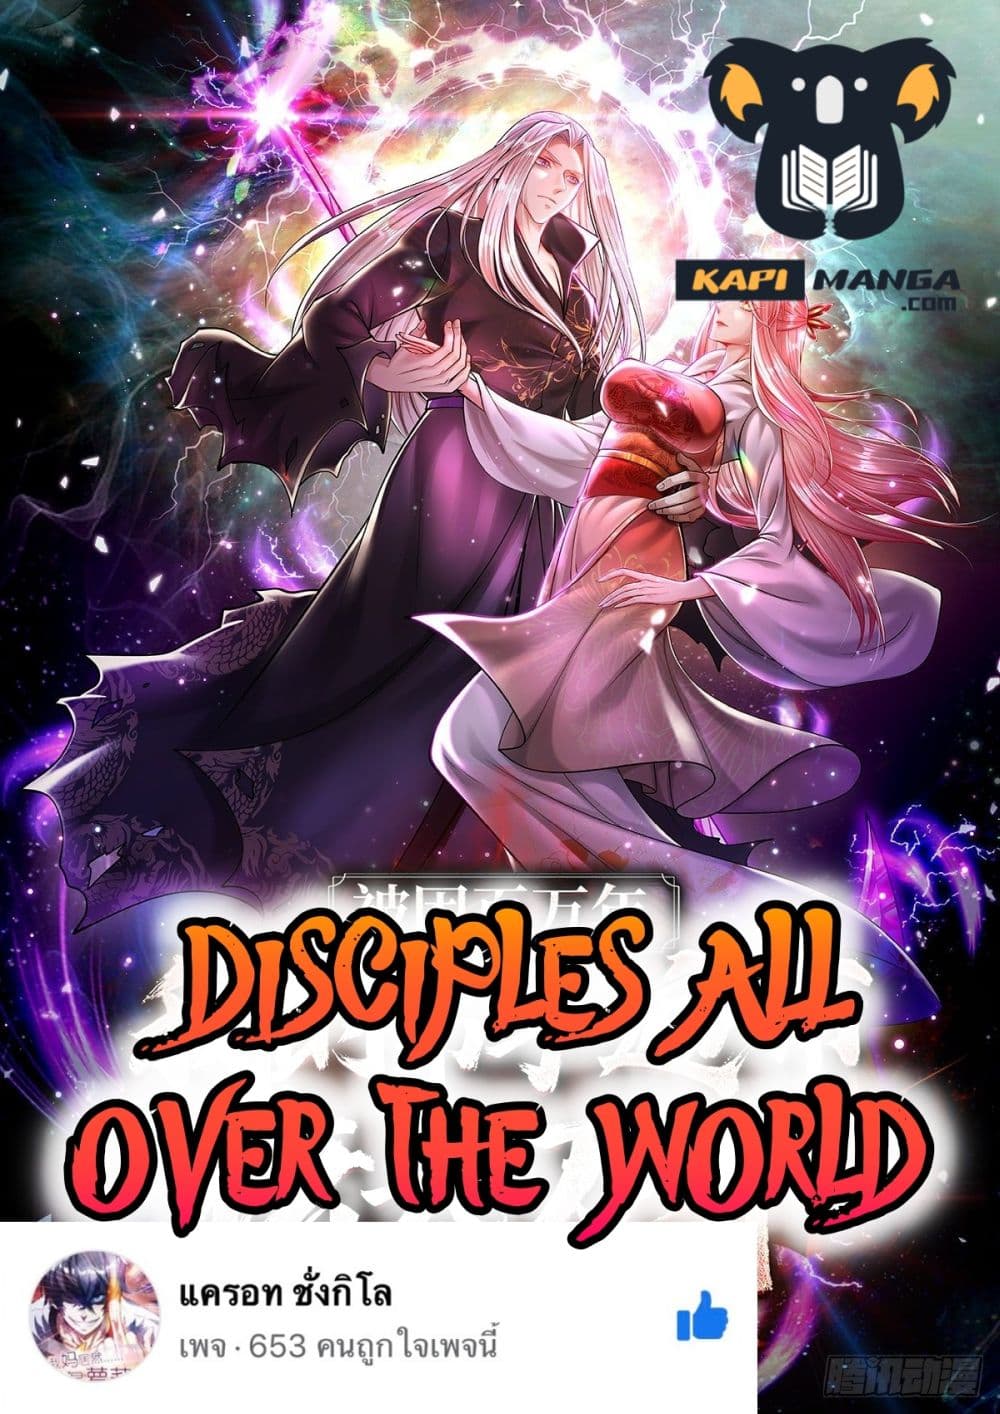 Disciples All Over the World à¸à¸­à¸à¸à¸µà¹ 68 (1)